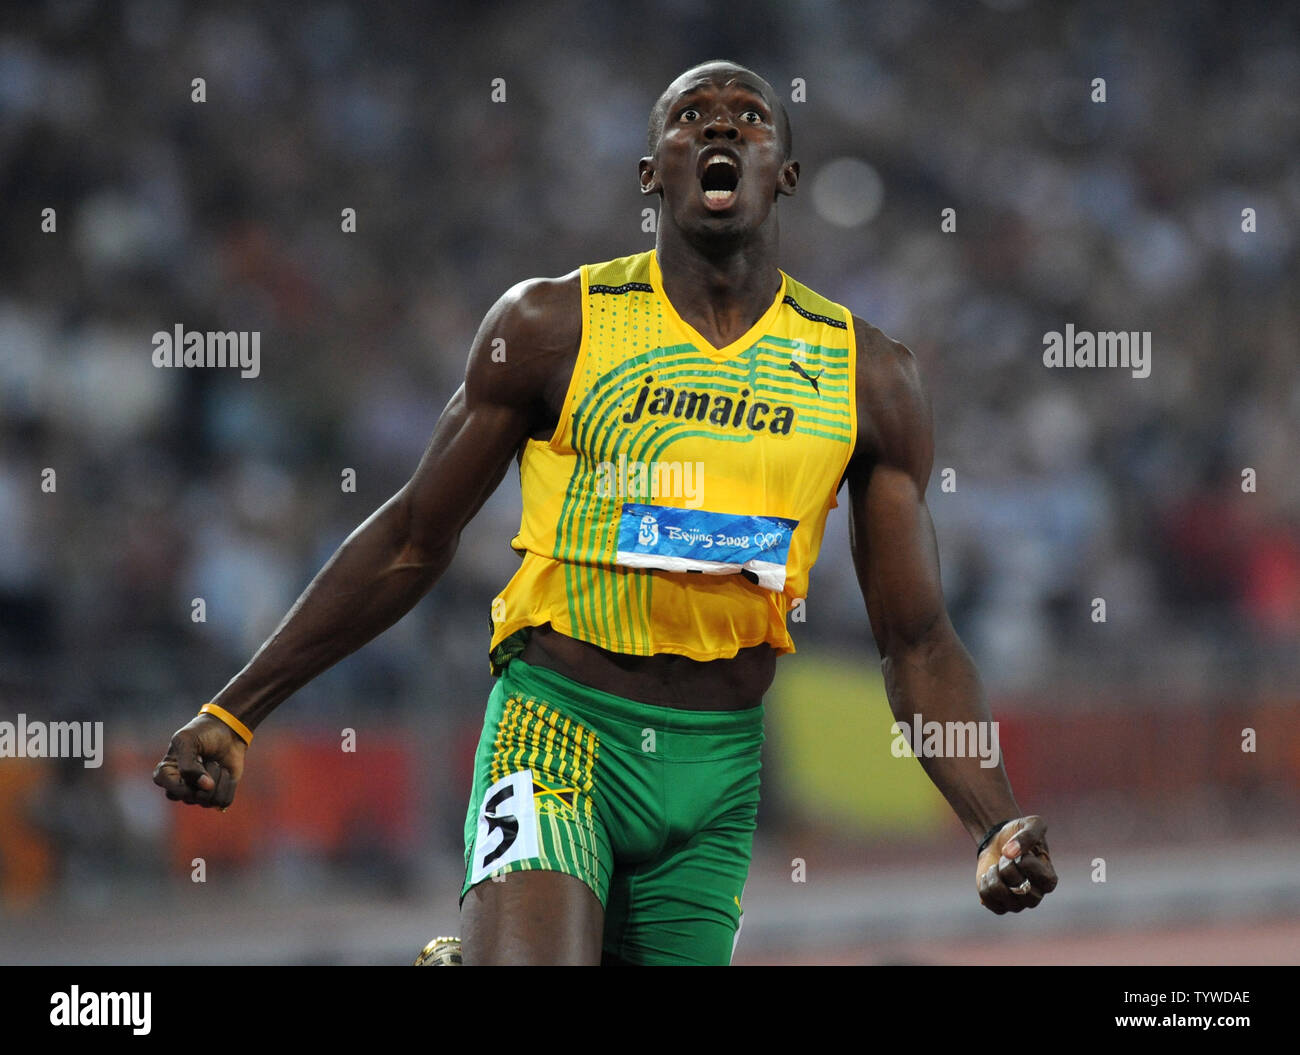 Jamaica's Usain Bolt jubilates as he crosses the finish line and ...